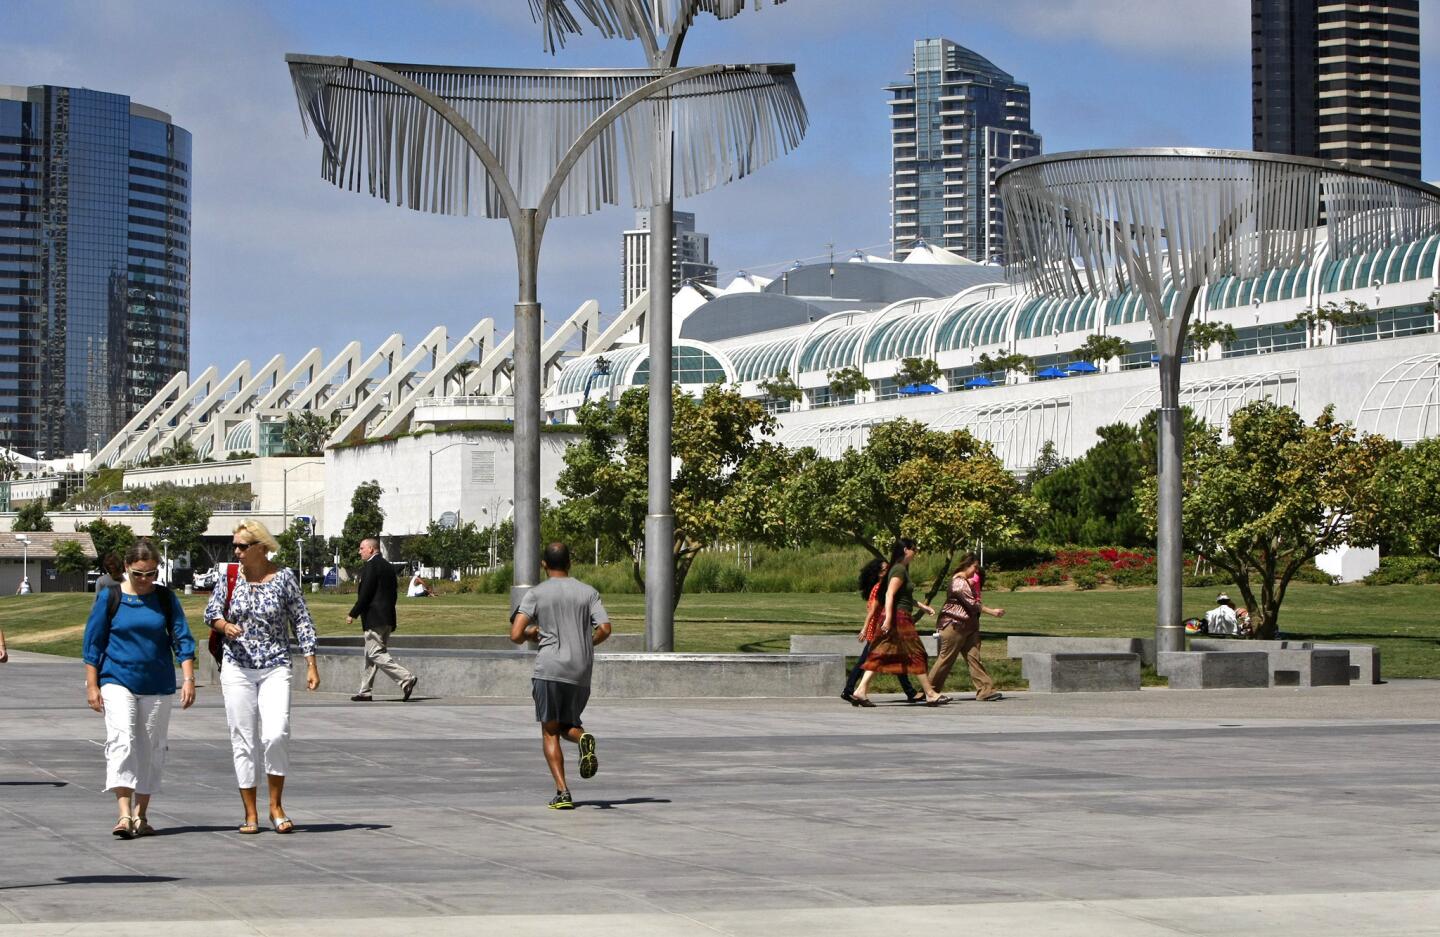 San Diego Convention Center expansion proposal